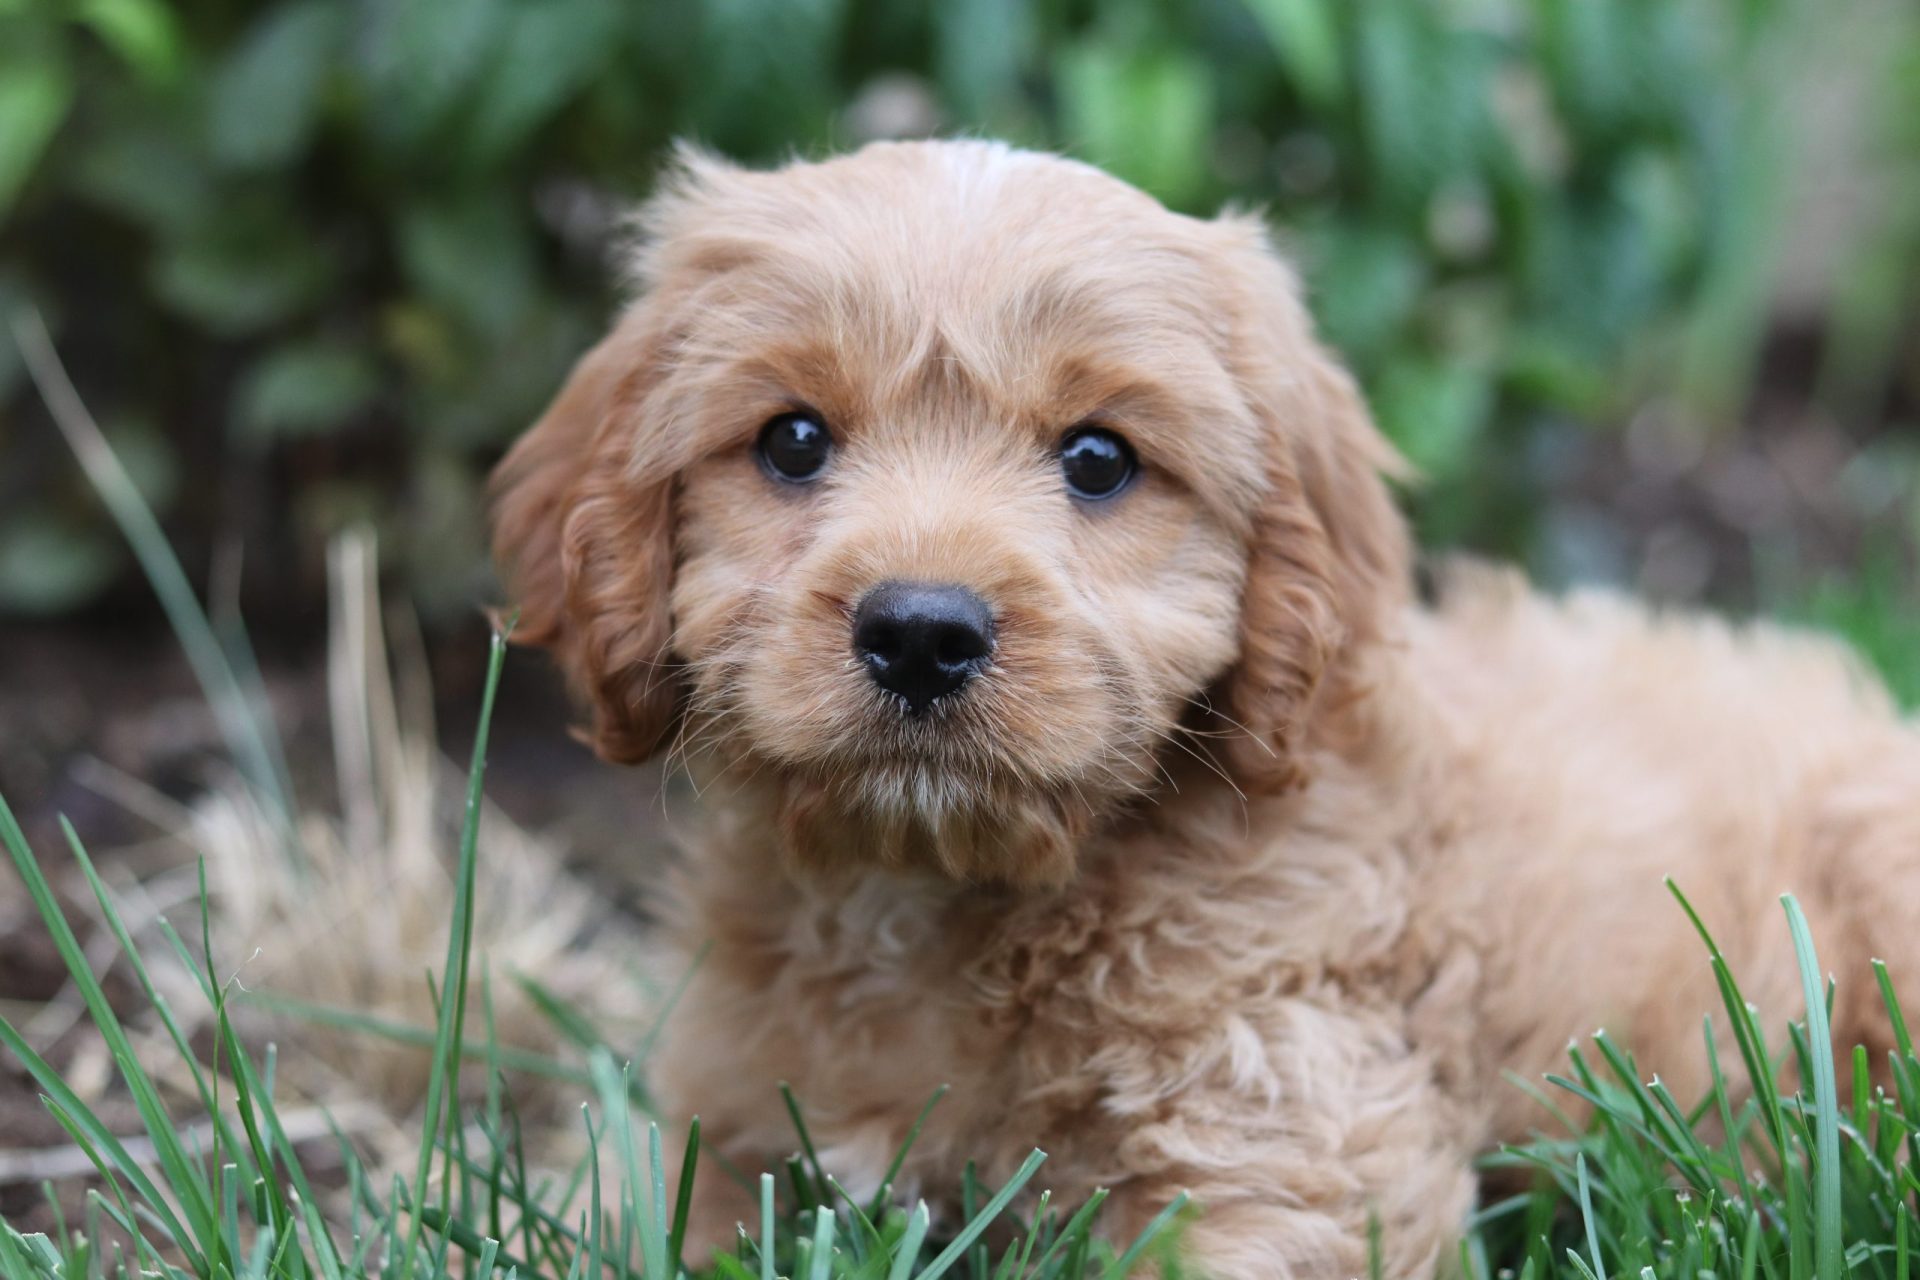 do cavoodle puppies shed